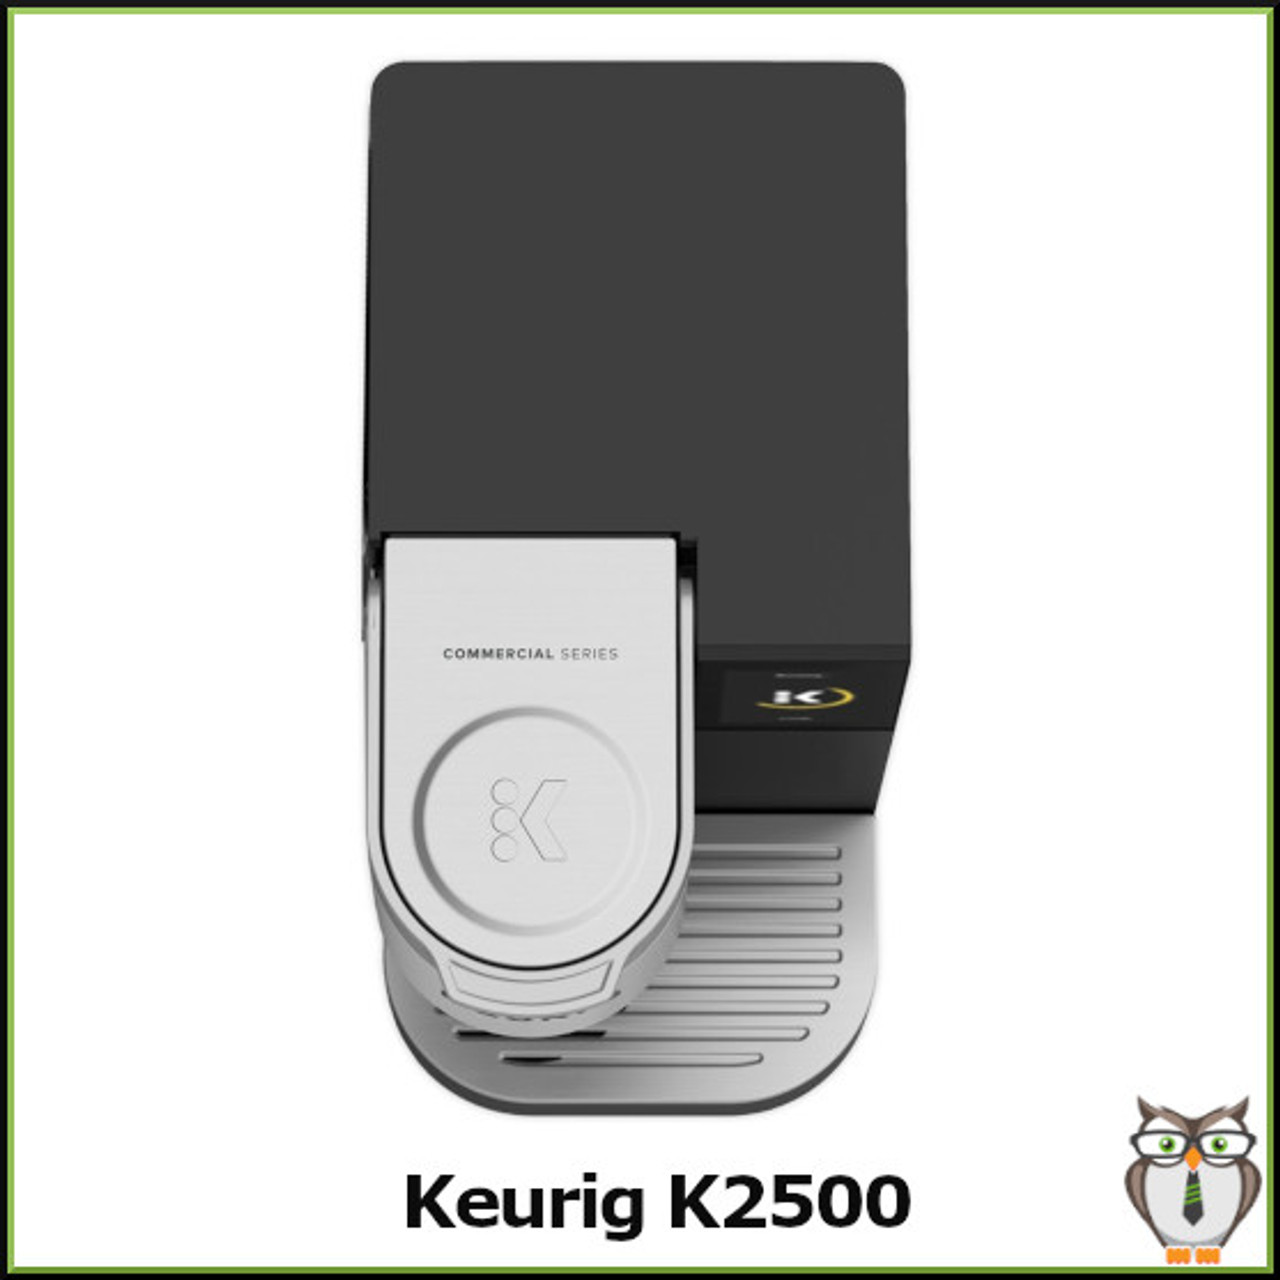 Keurig K2500-7952 (Direct Plumbed) Commercial Brewer - Top View